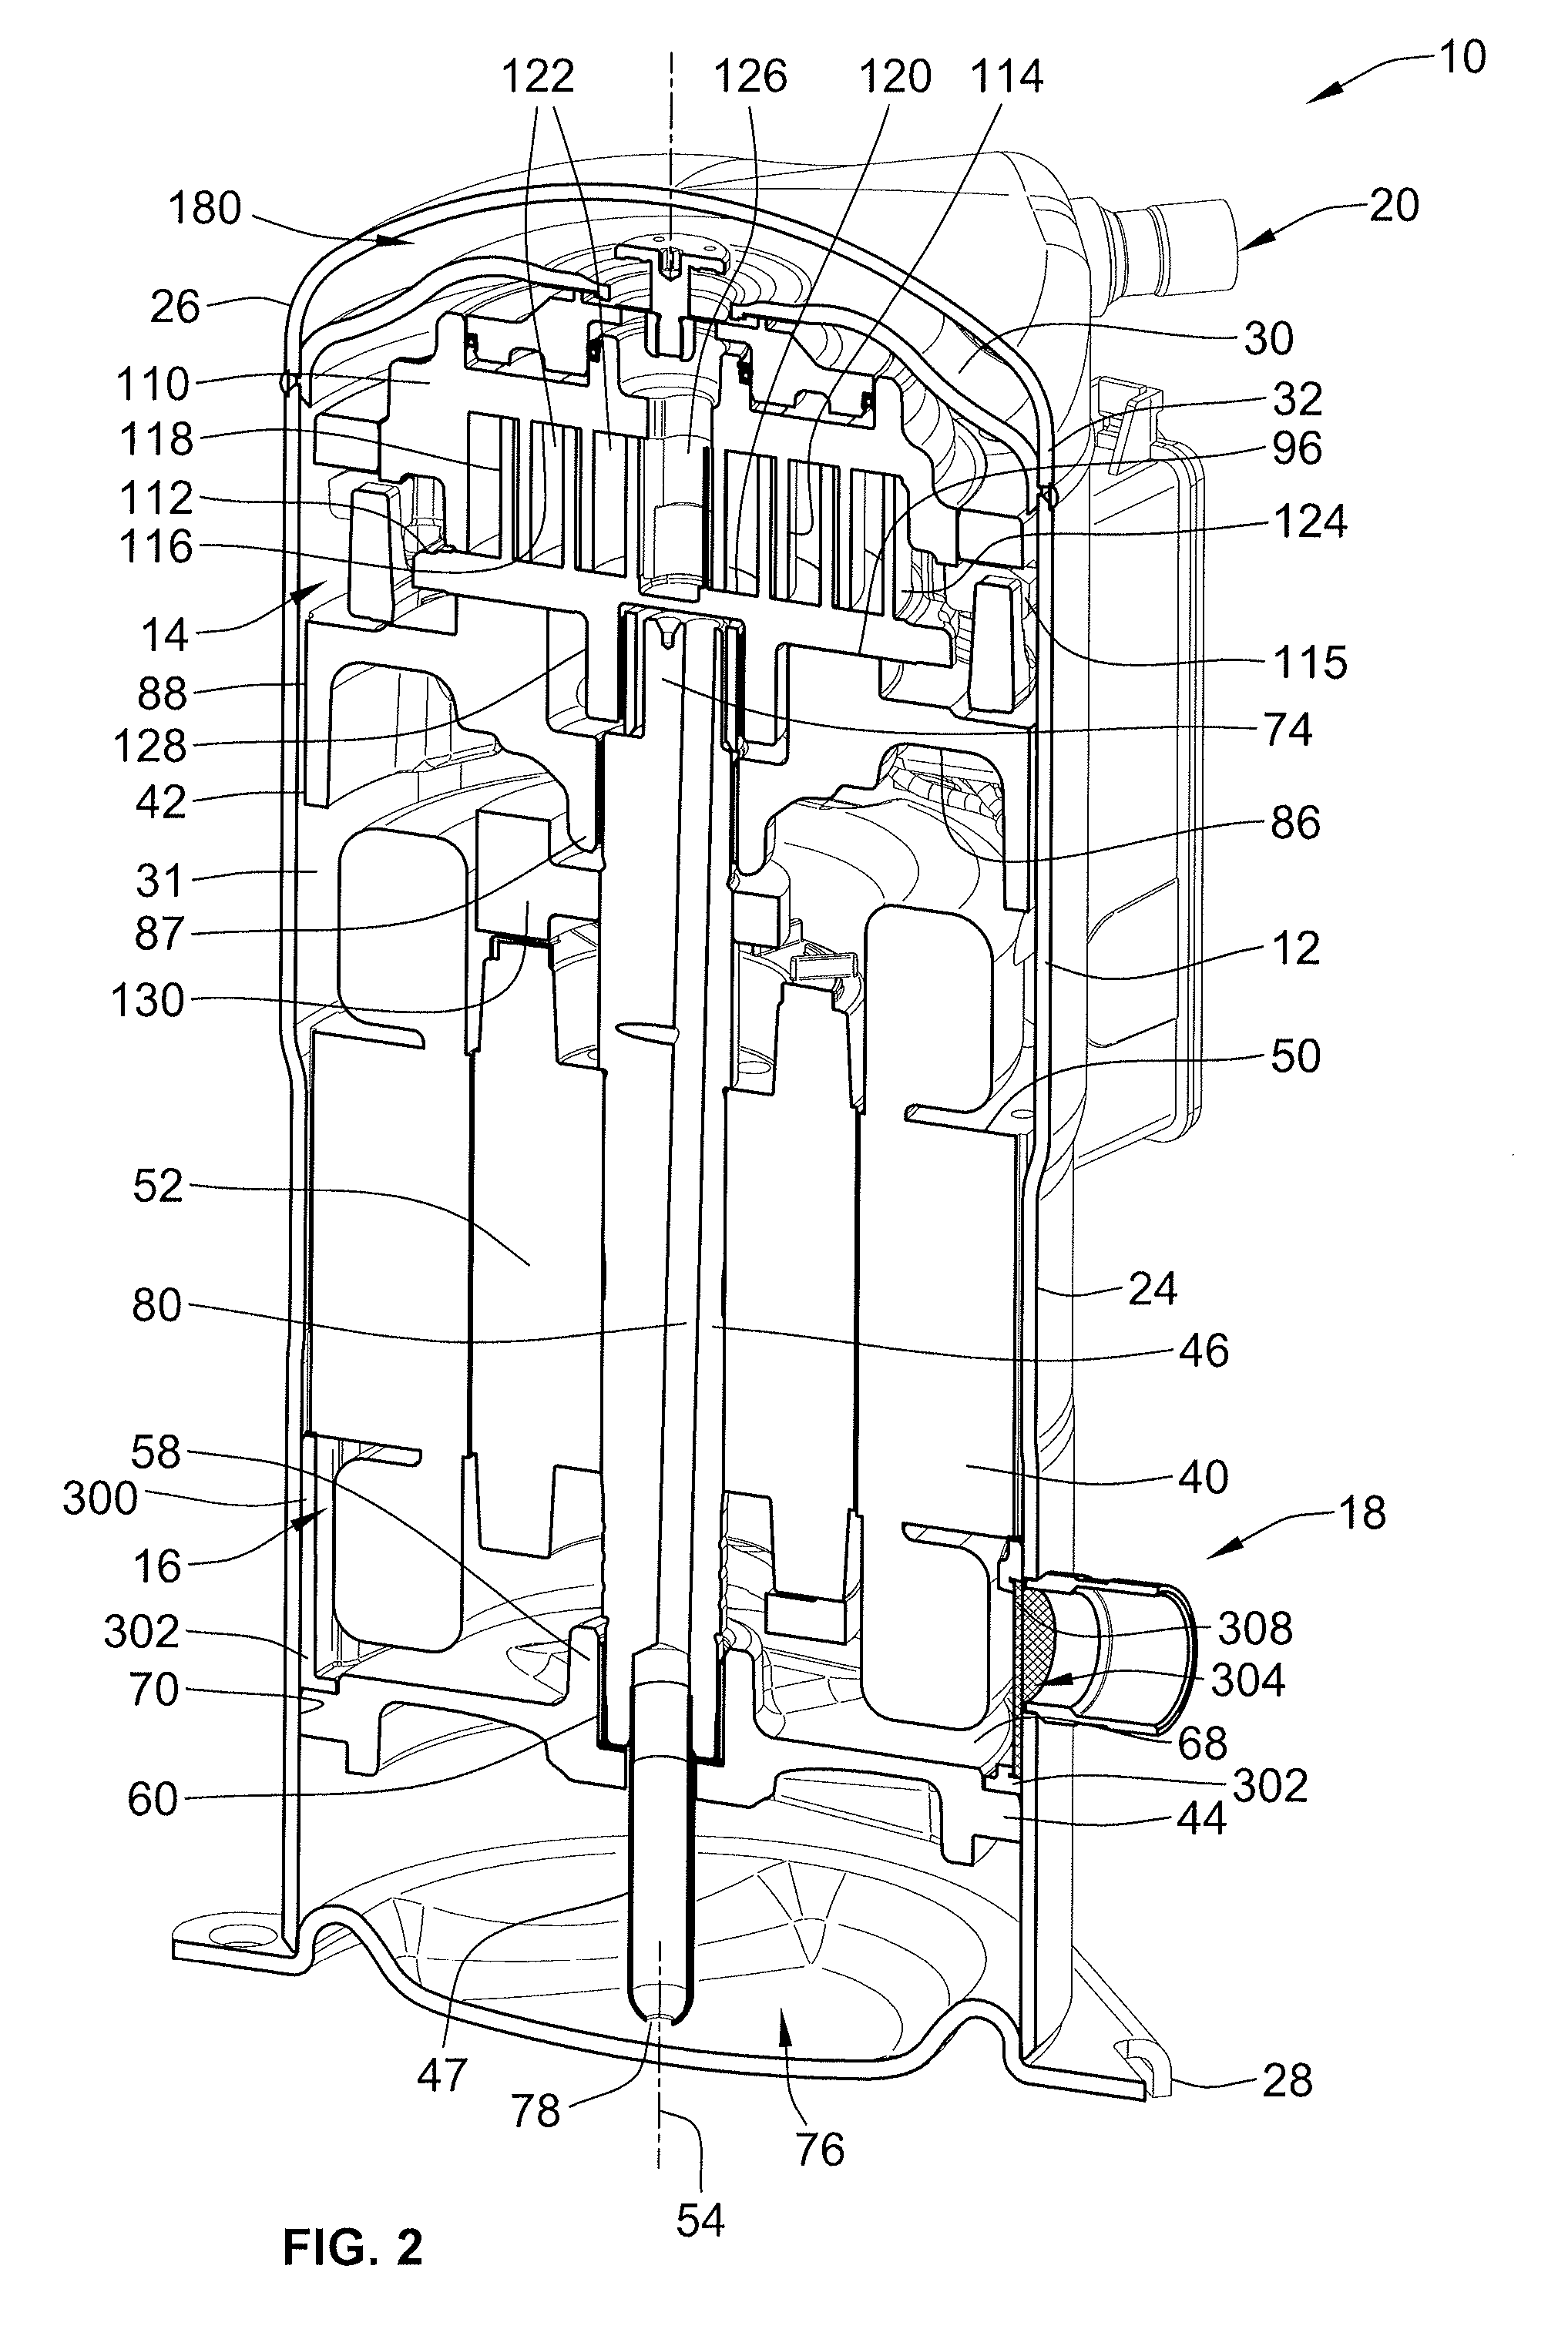 Apparatus and Method for Oil Equalization in Multiple-Compressor Systems